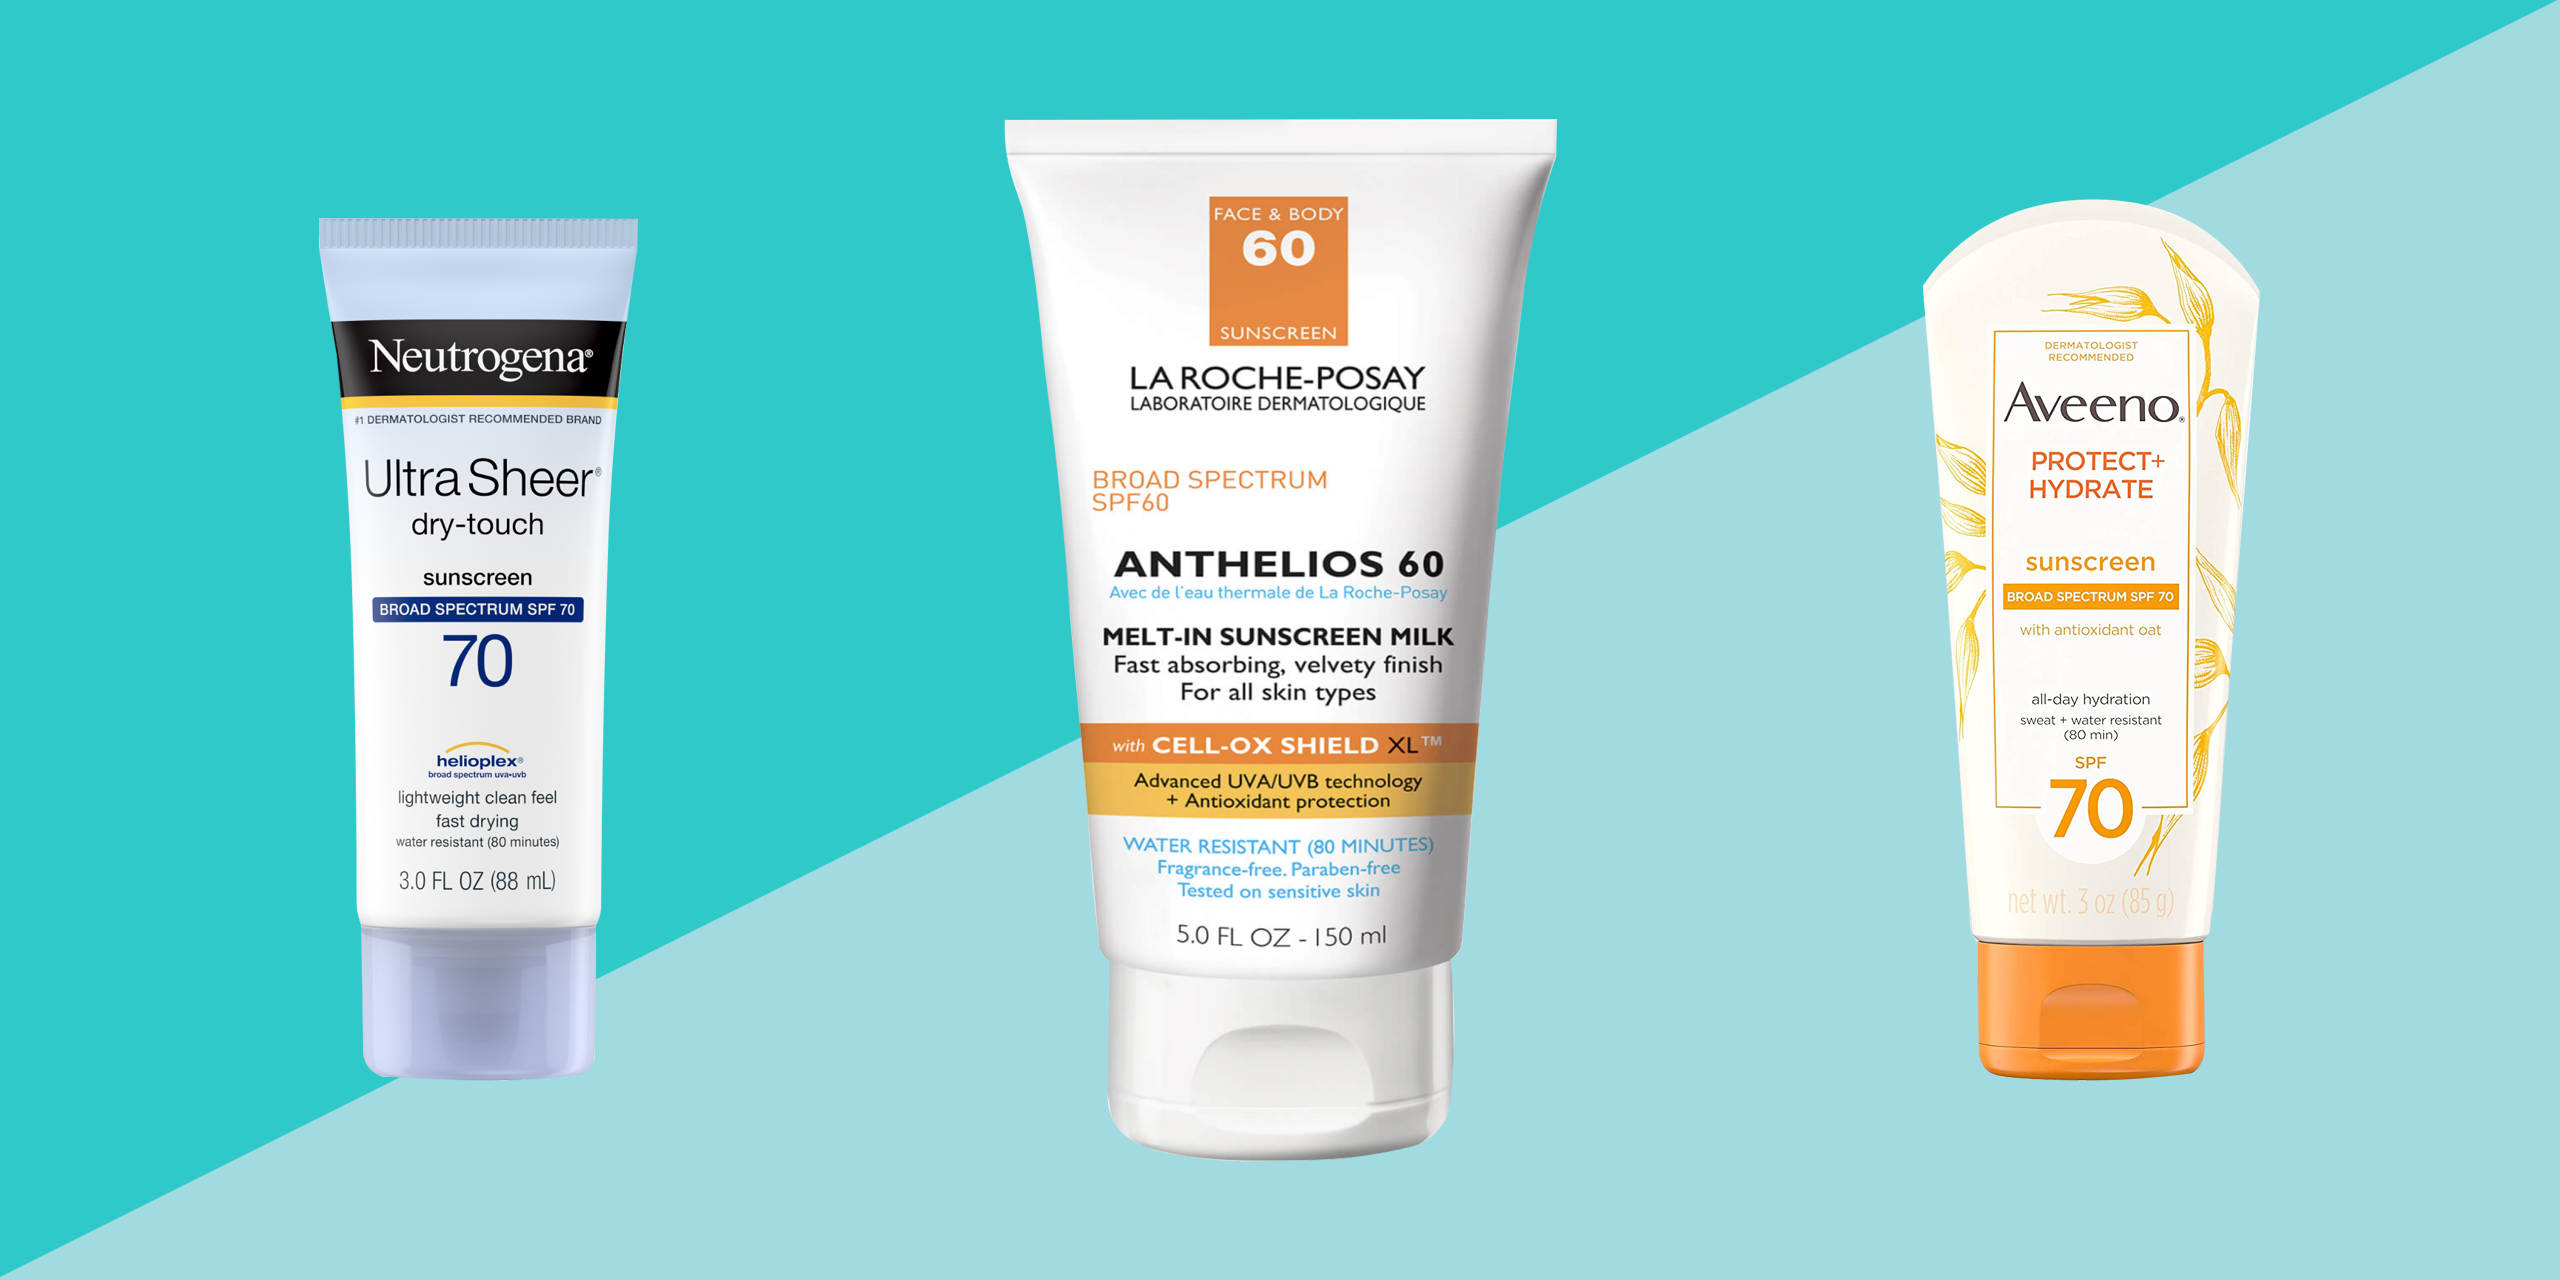 15 Best Sunscreens in 2020, According 